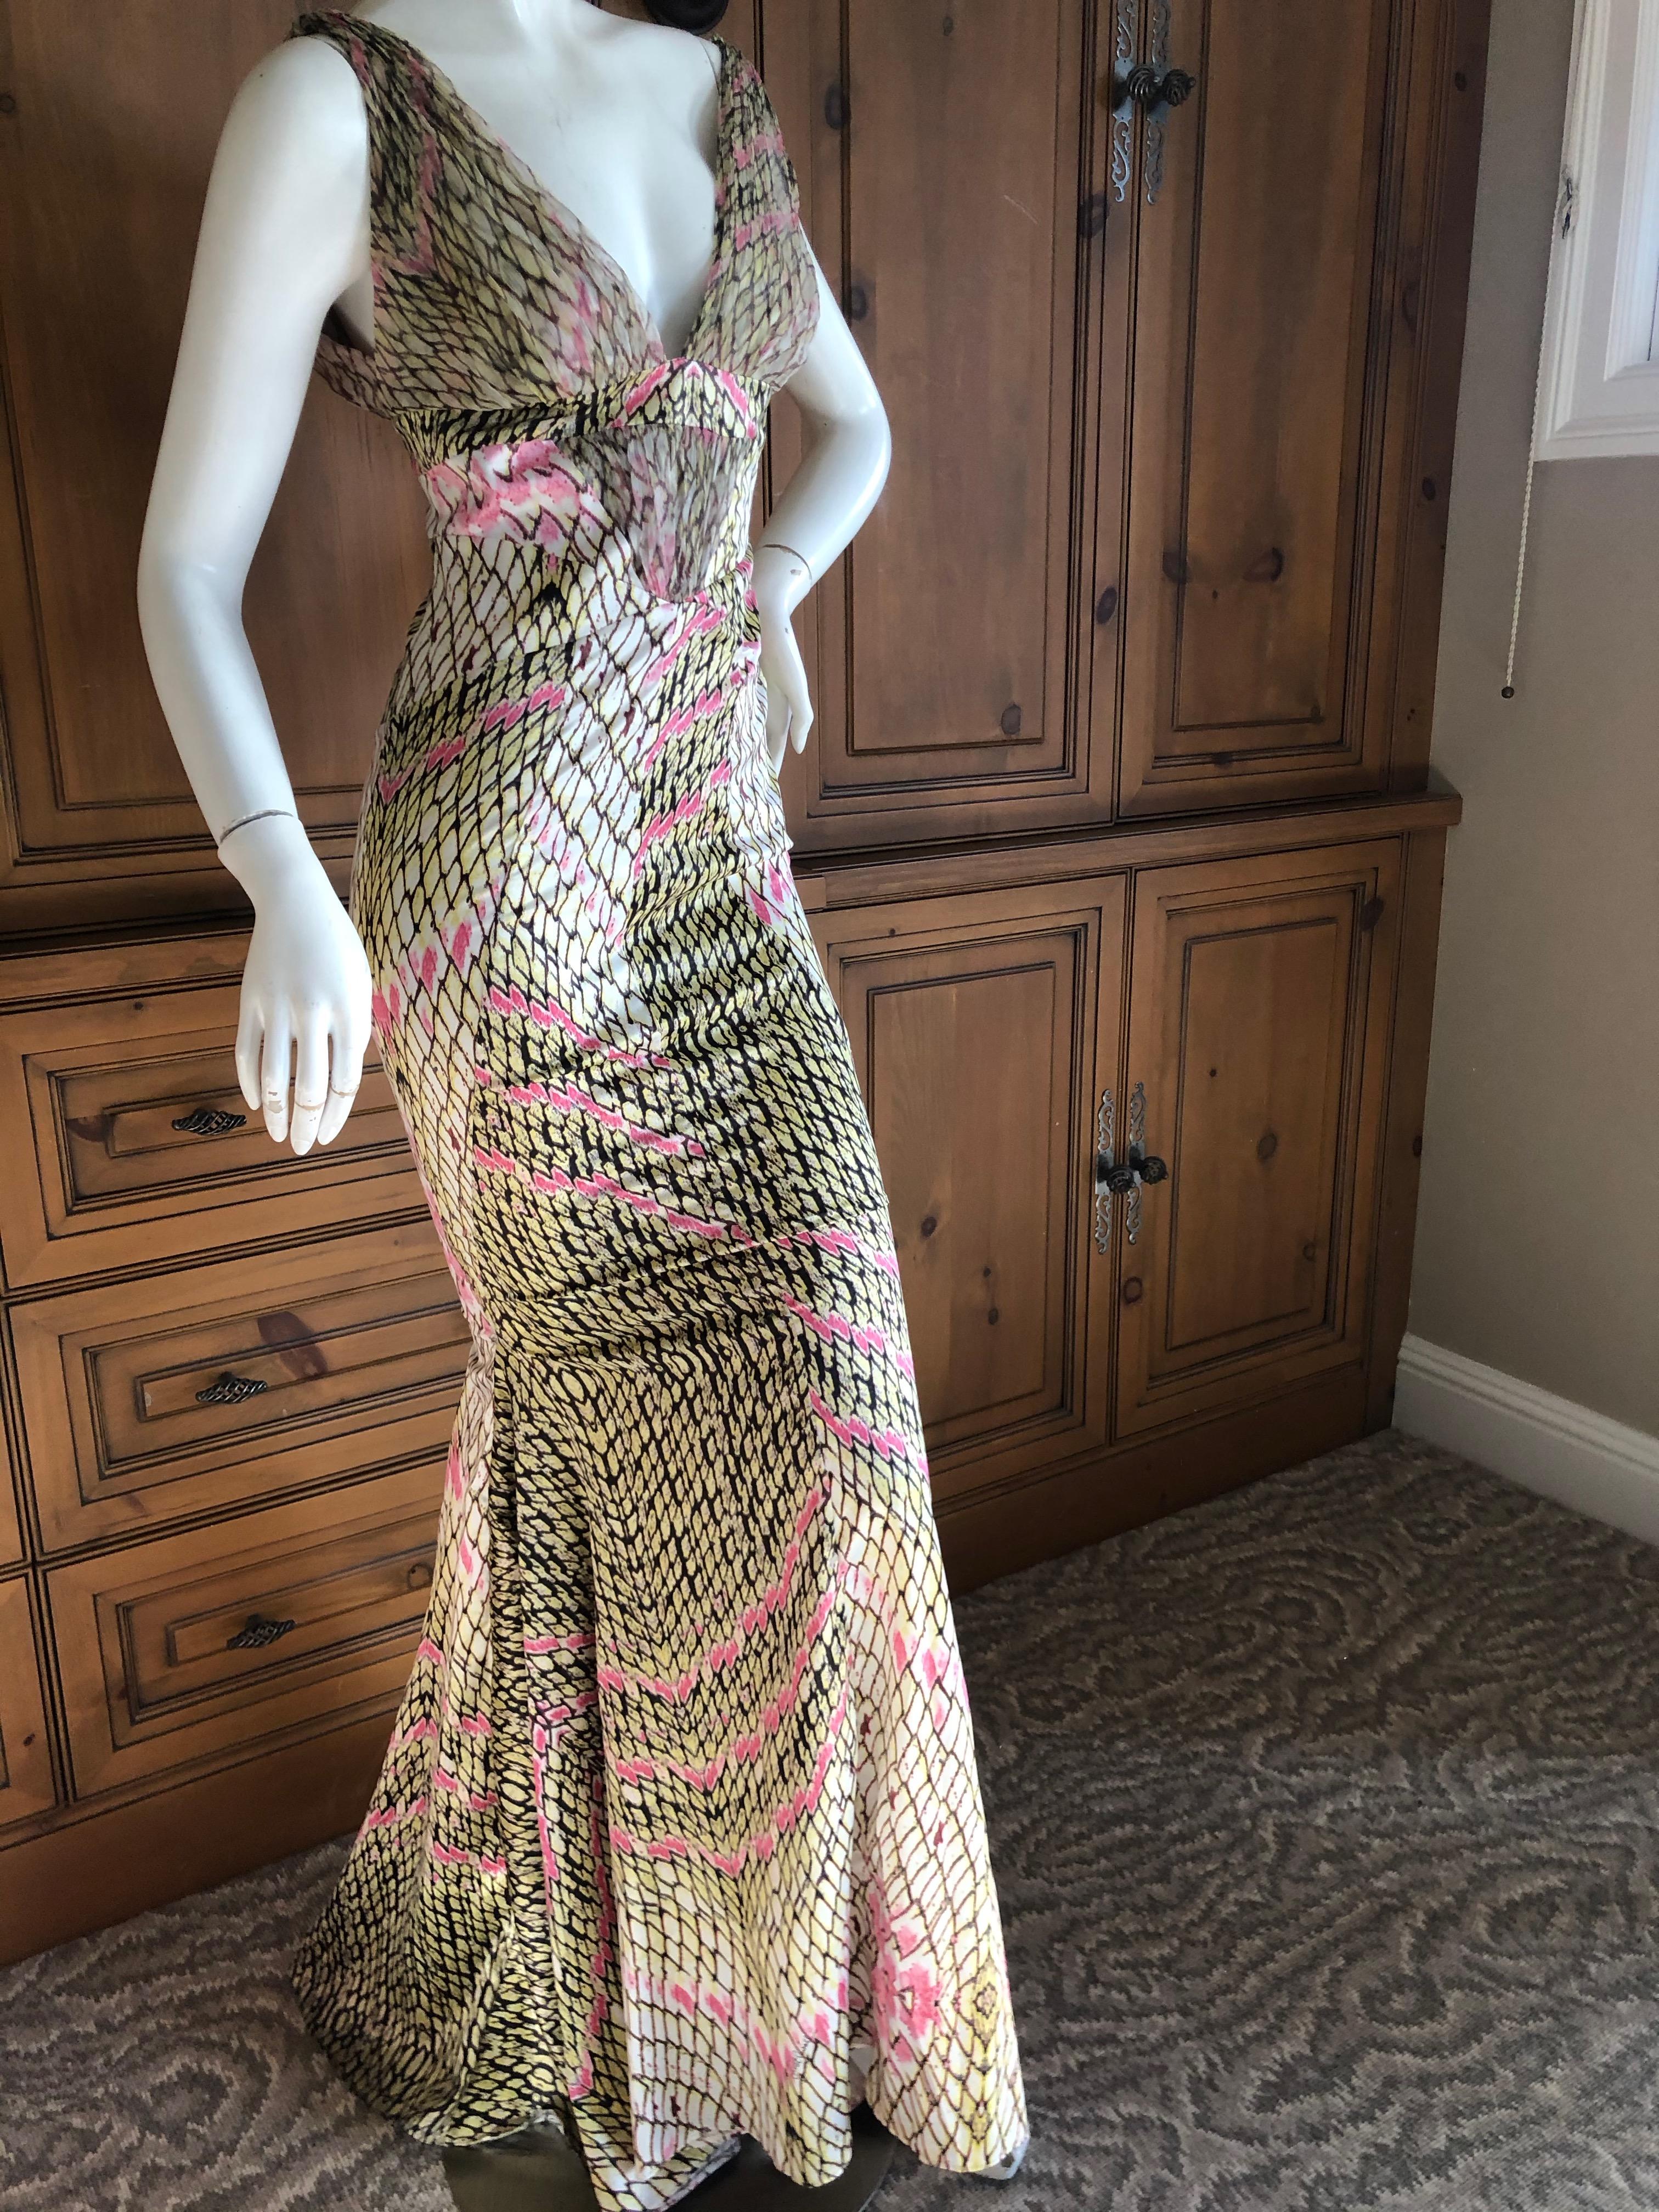 Just Cavalli by Roberto Cavalli Reptile Print Fishtail Mermaid Gown In Excellent Condition For Sale In Cloverdale, CA